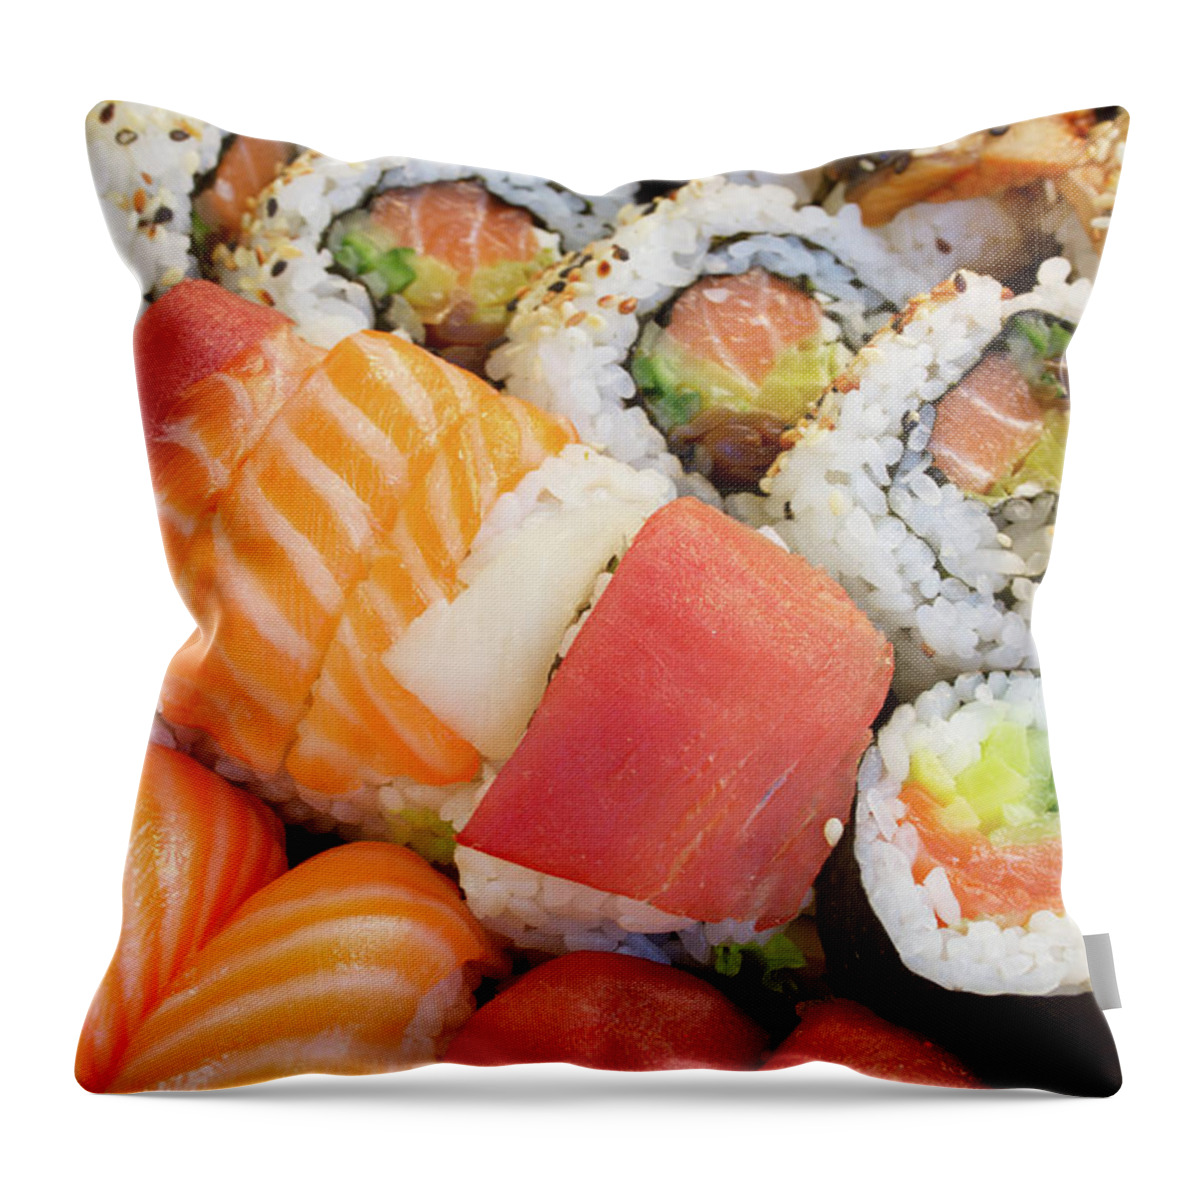 Sushi Throw Pillow featuring the photograph Sushi Dish by Anastasy Yarmolovich